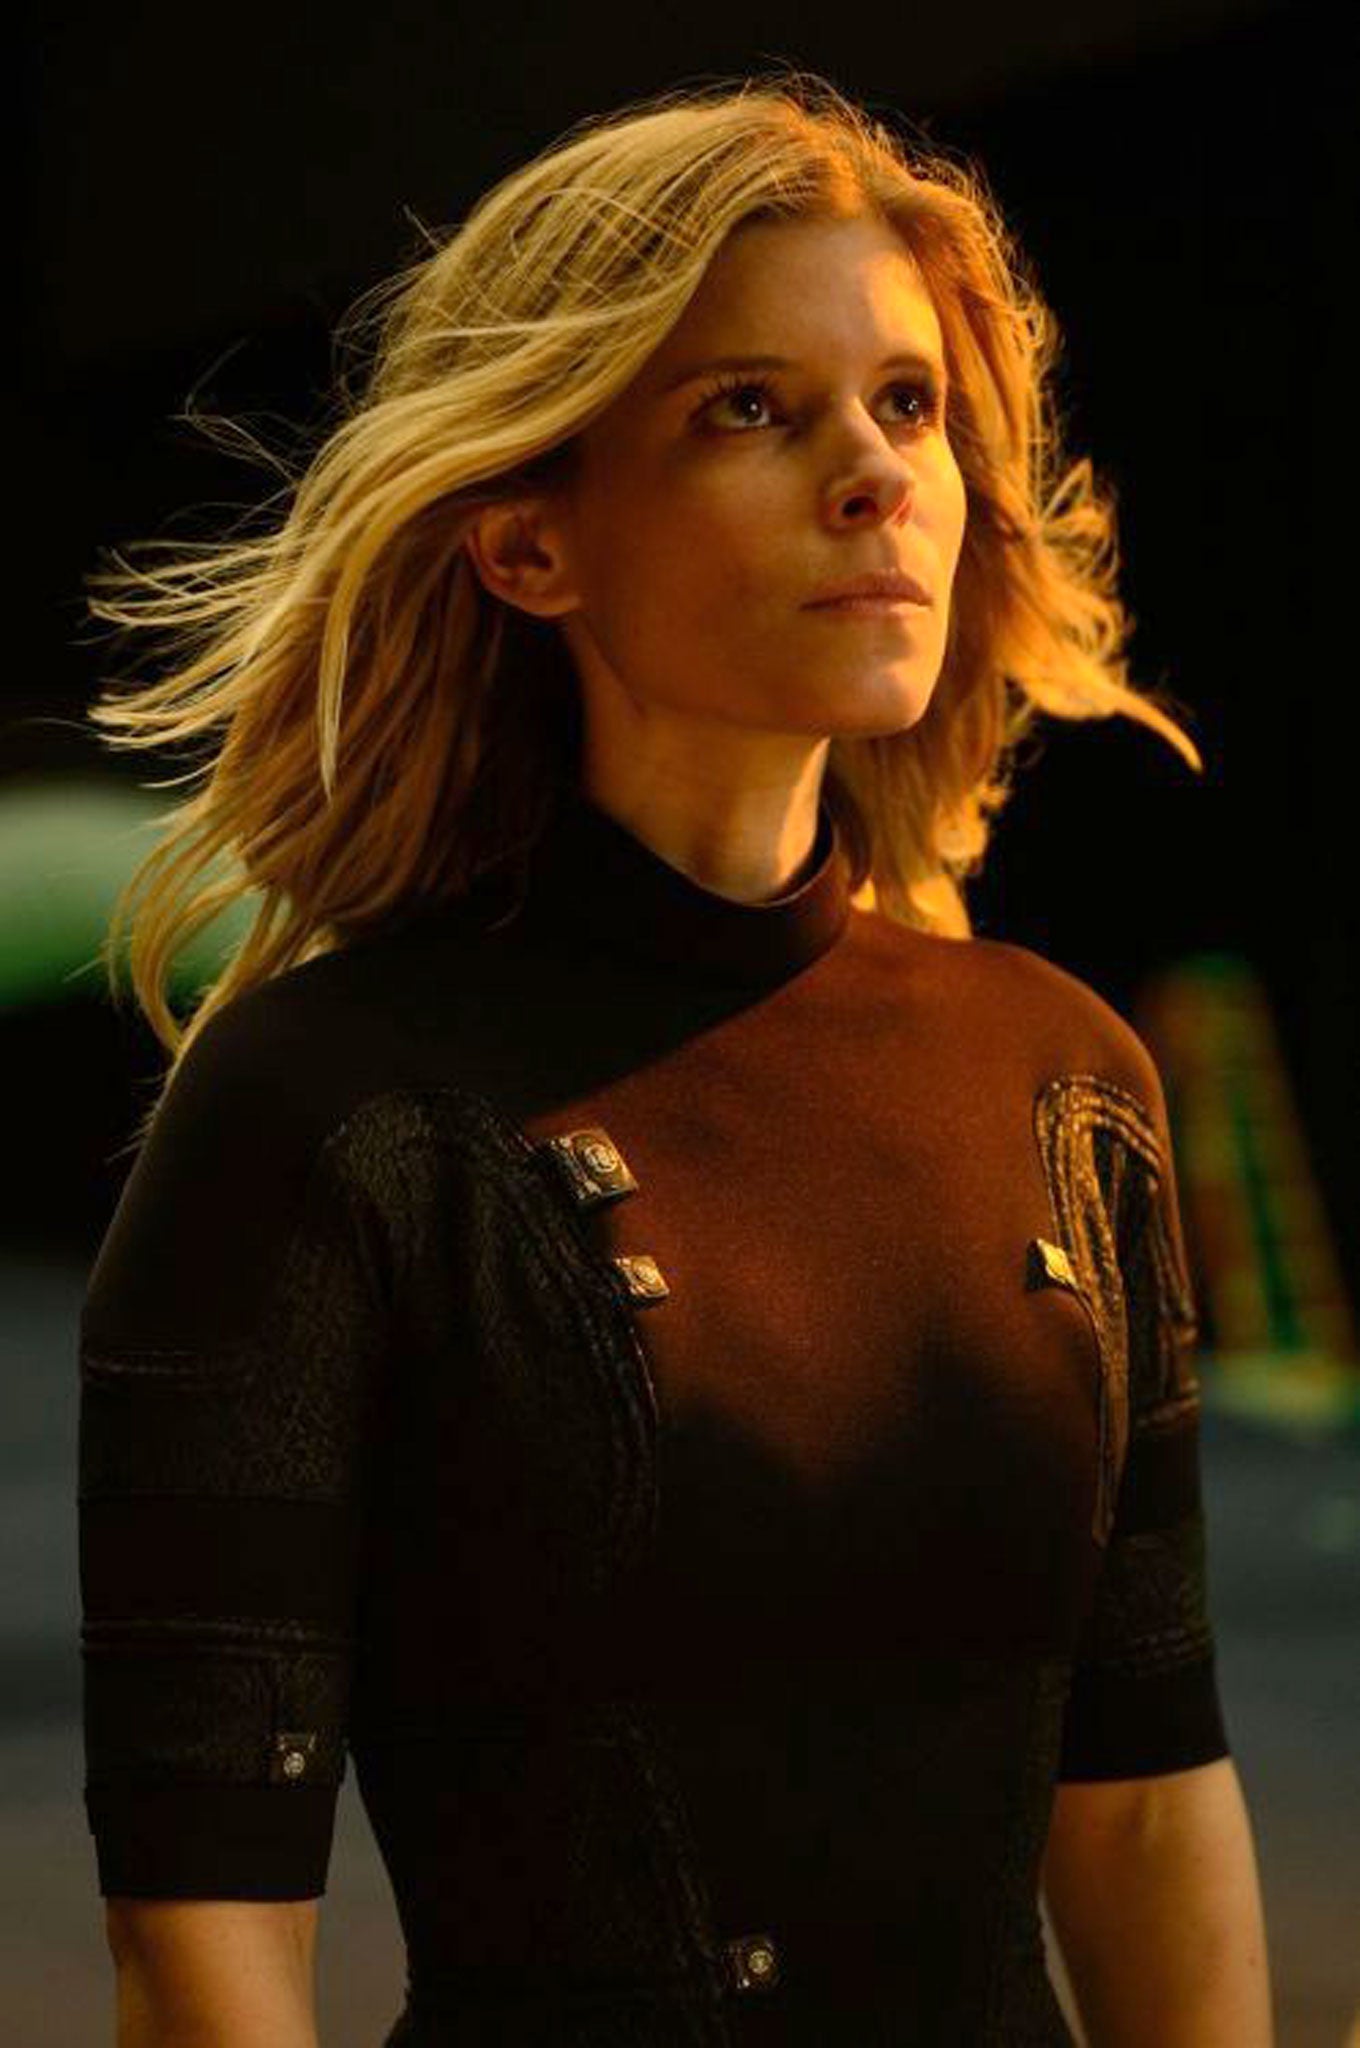 Kate Mara plays Sue, a brilliant young scientist who listens to Portishead when she is working